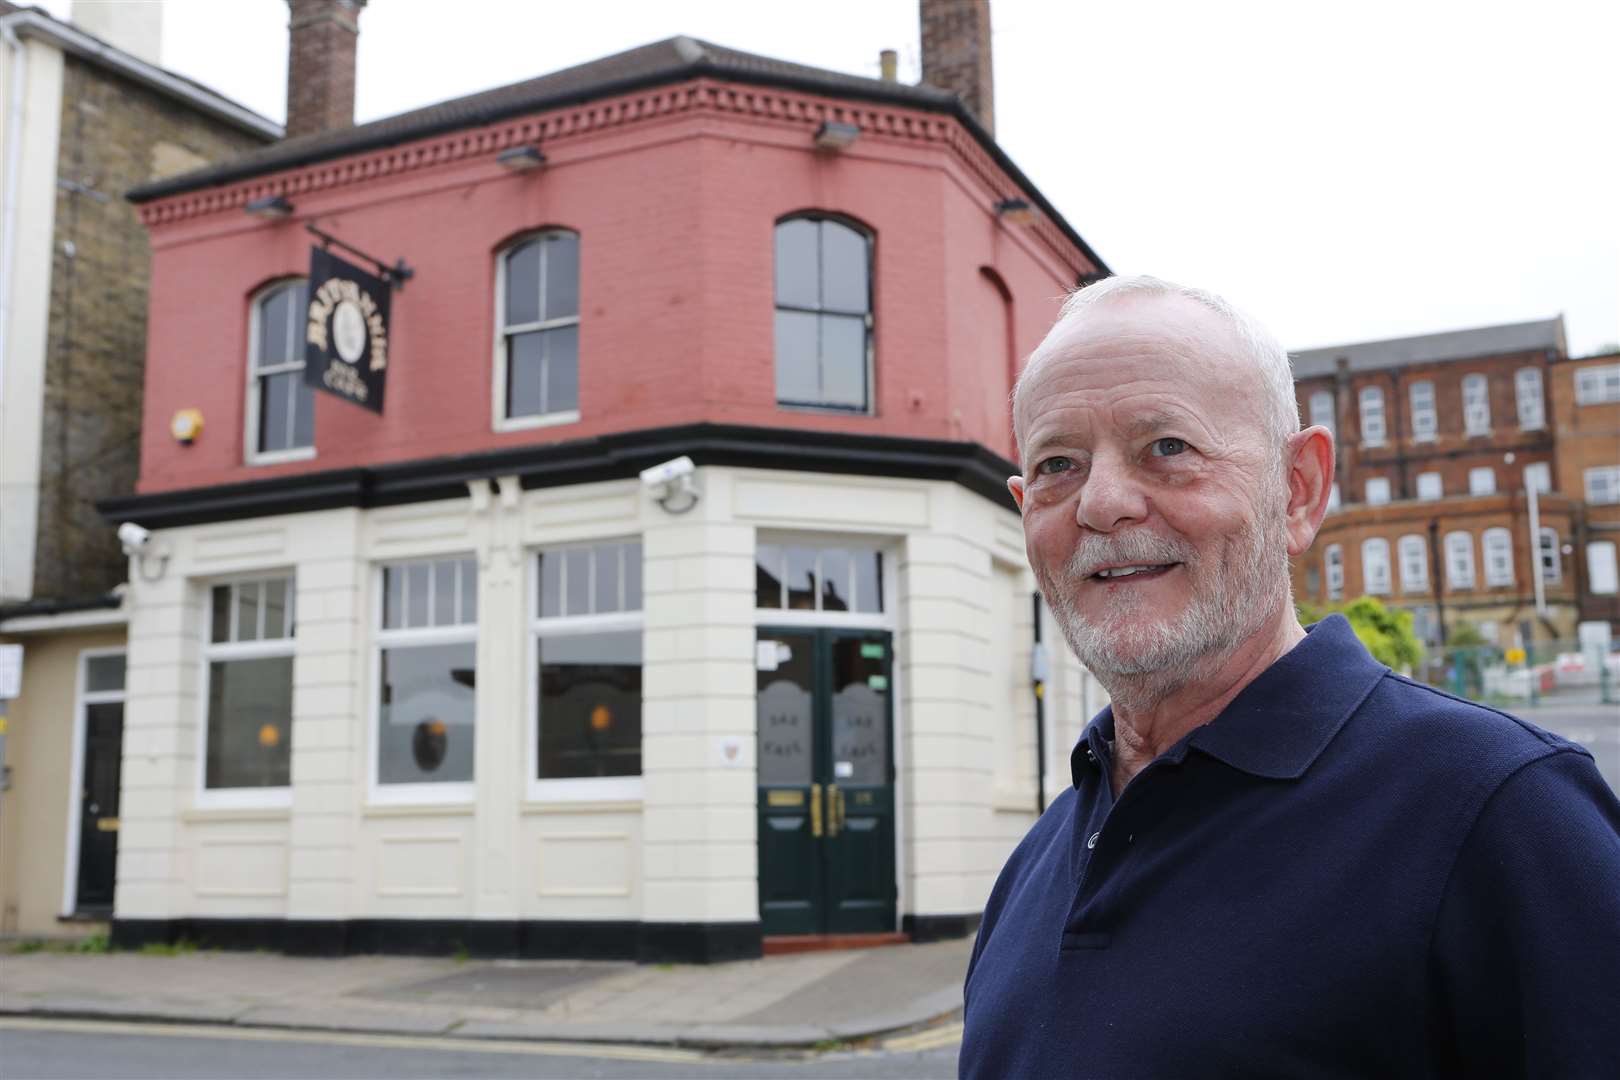 The Britannia pub has closed after 160 years, John Baker was the last landlord and was there for 18 of them